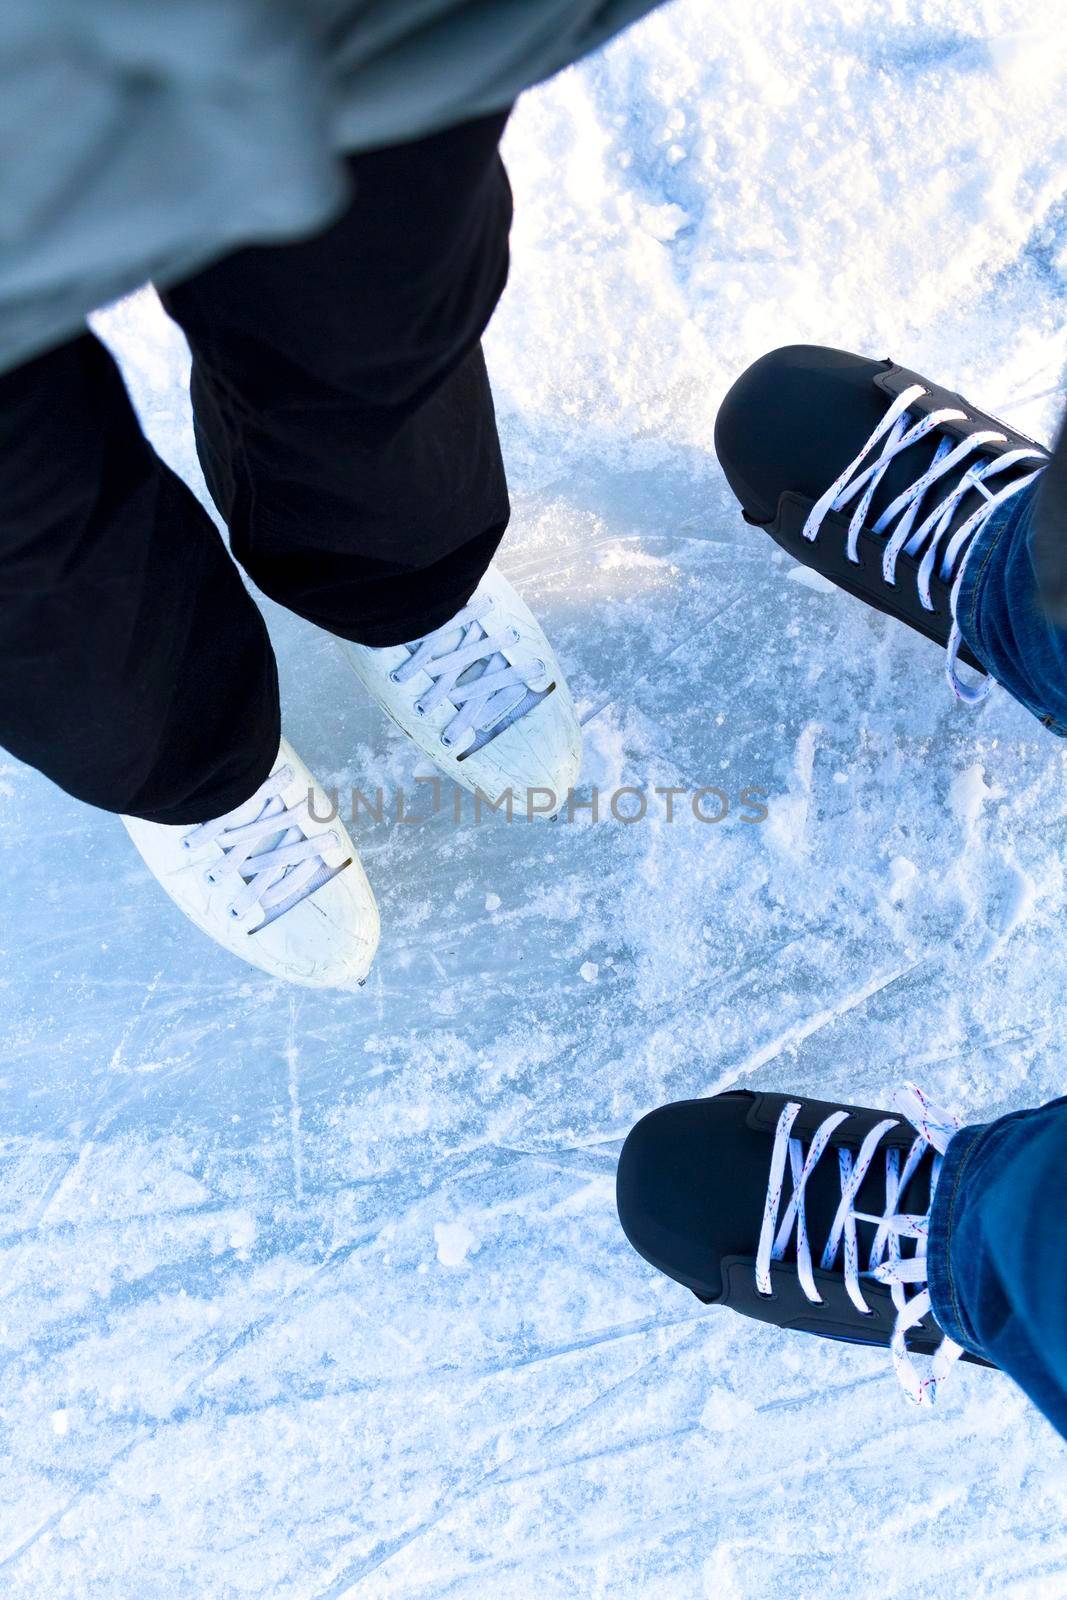 Woman and man together on the ice rink. Winter activities and fun on the ice rink. Ice and feet by Nobilior